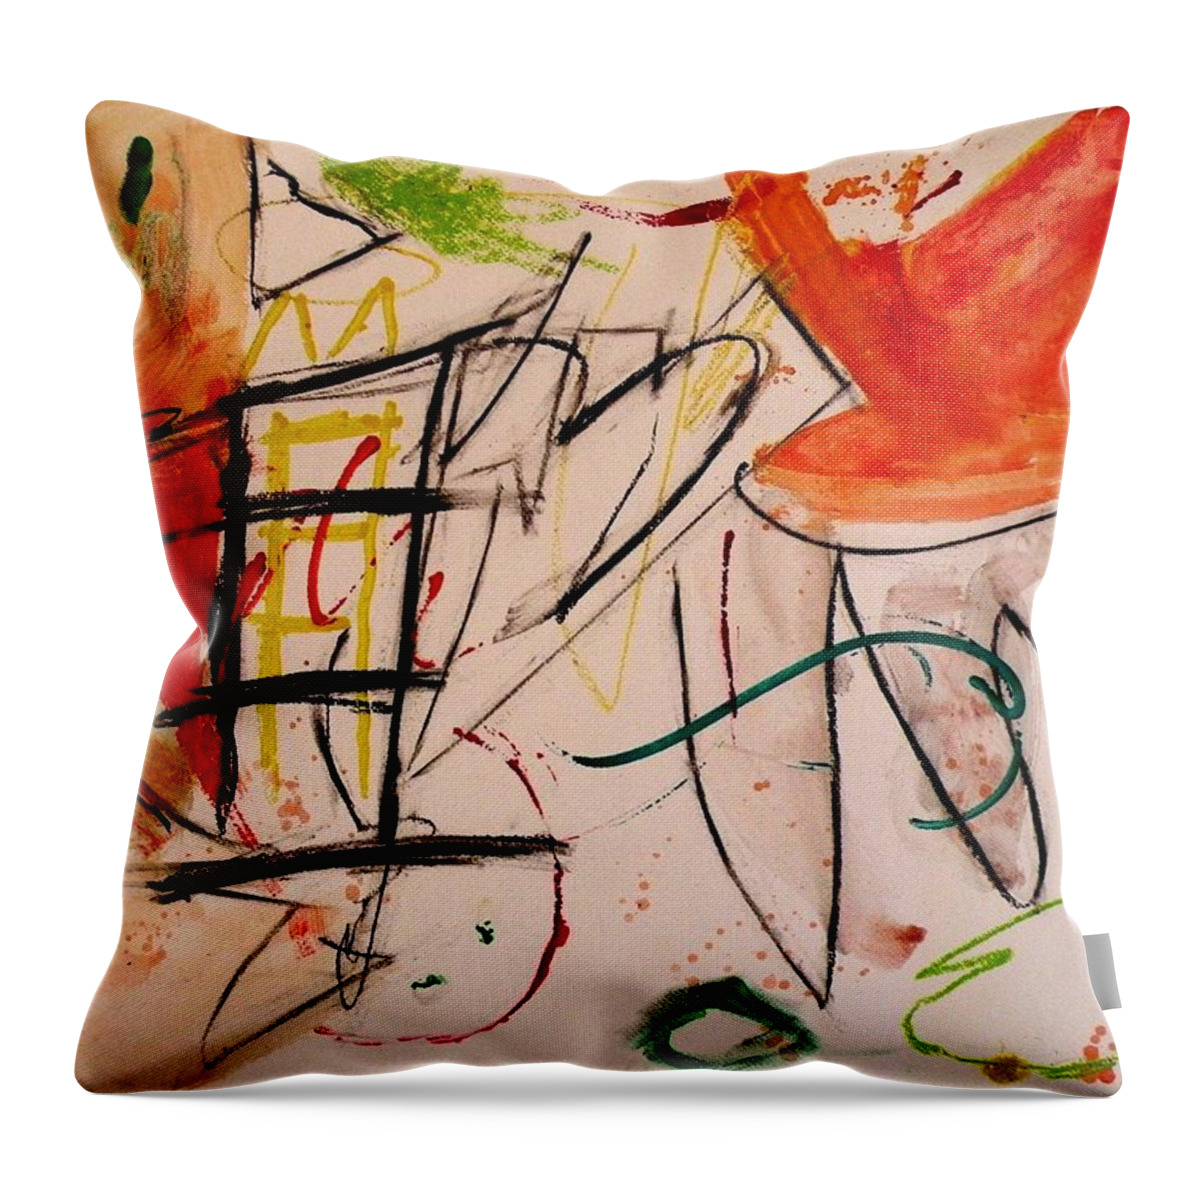 Orange Throw Pillow featuring the painting Exhuberance by Janis Kirstein